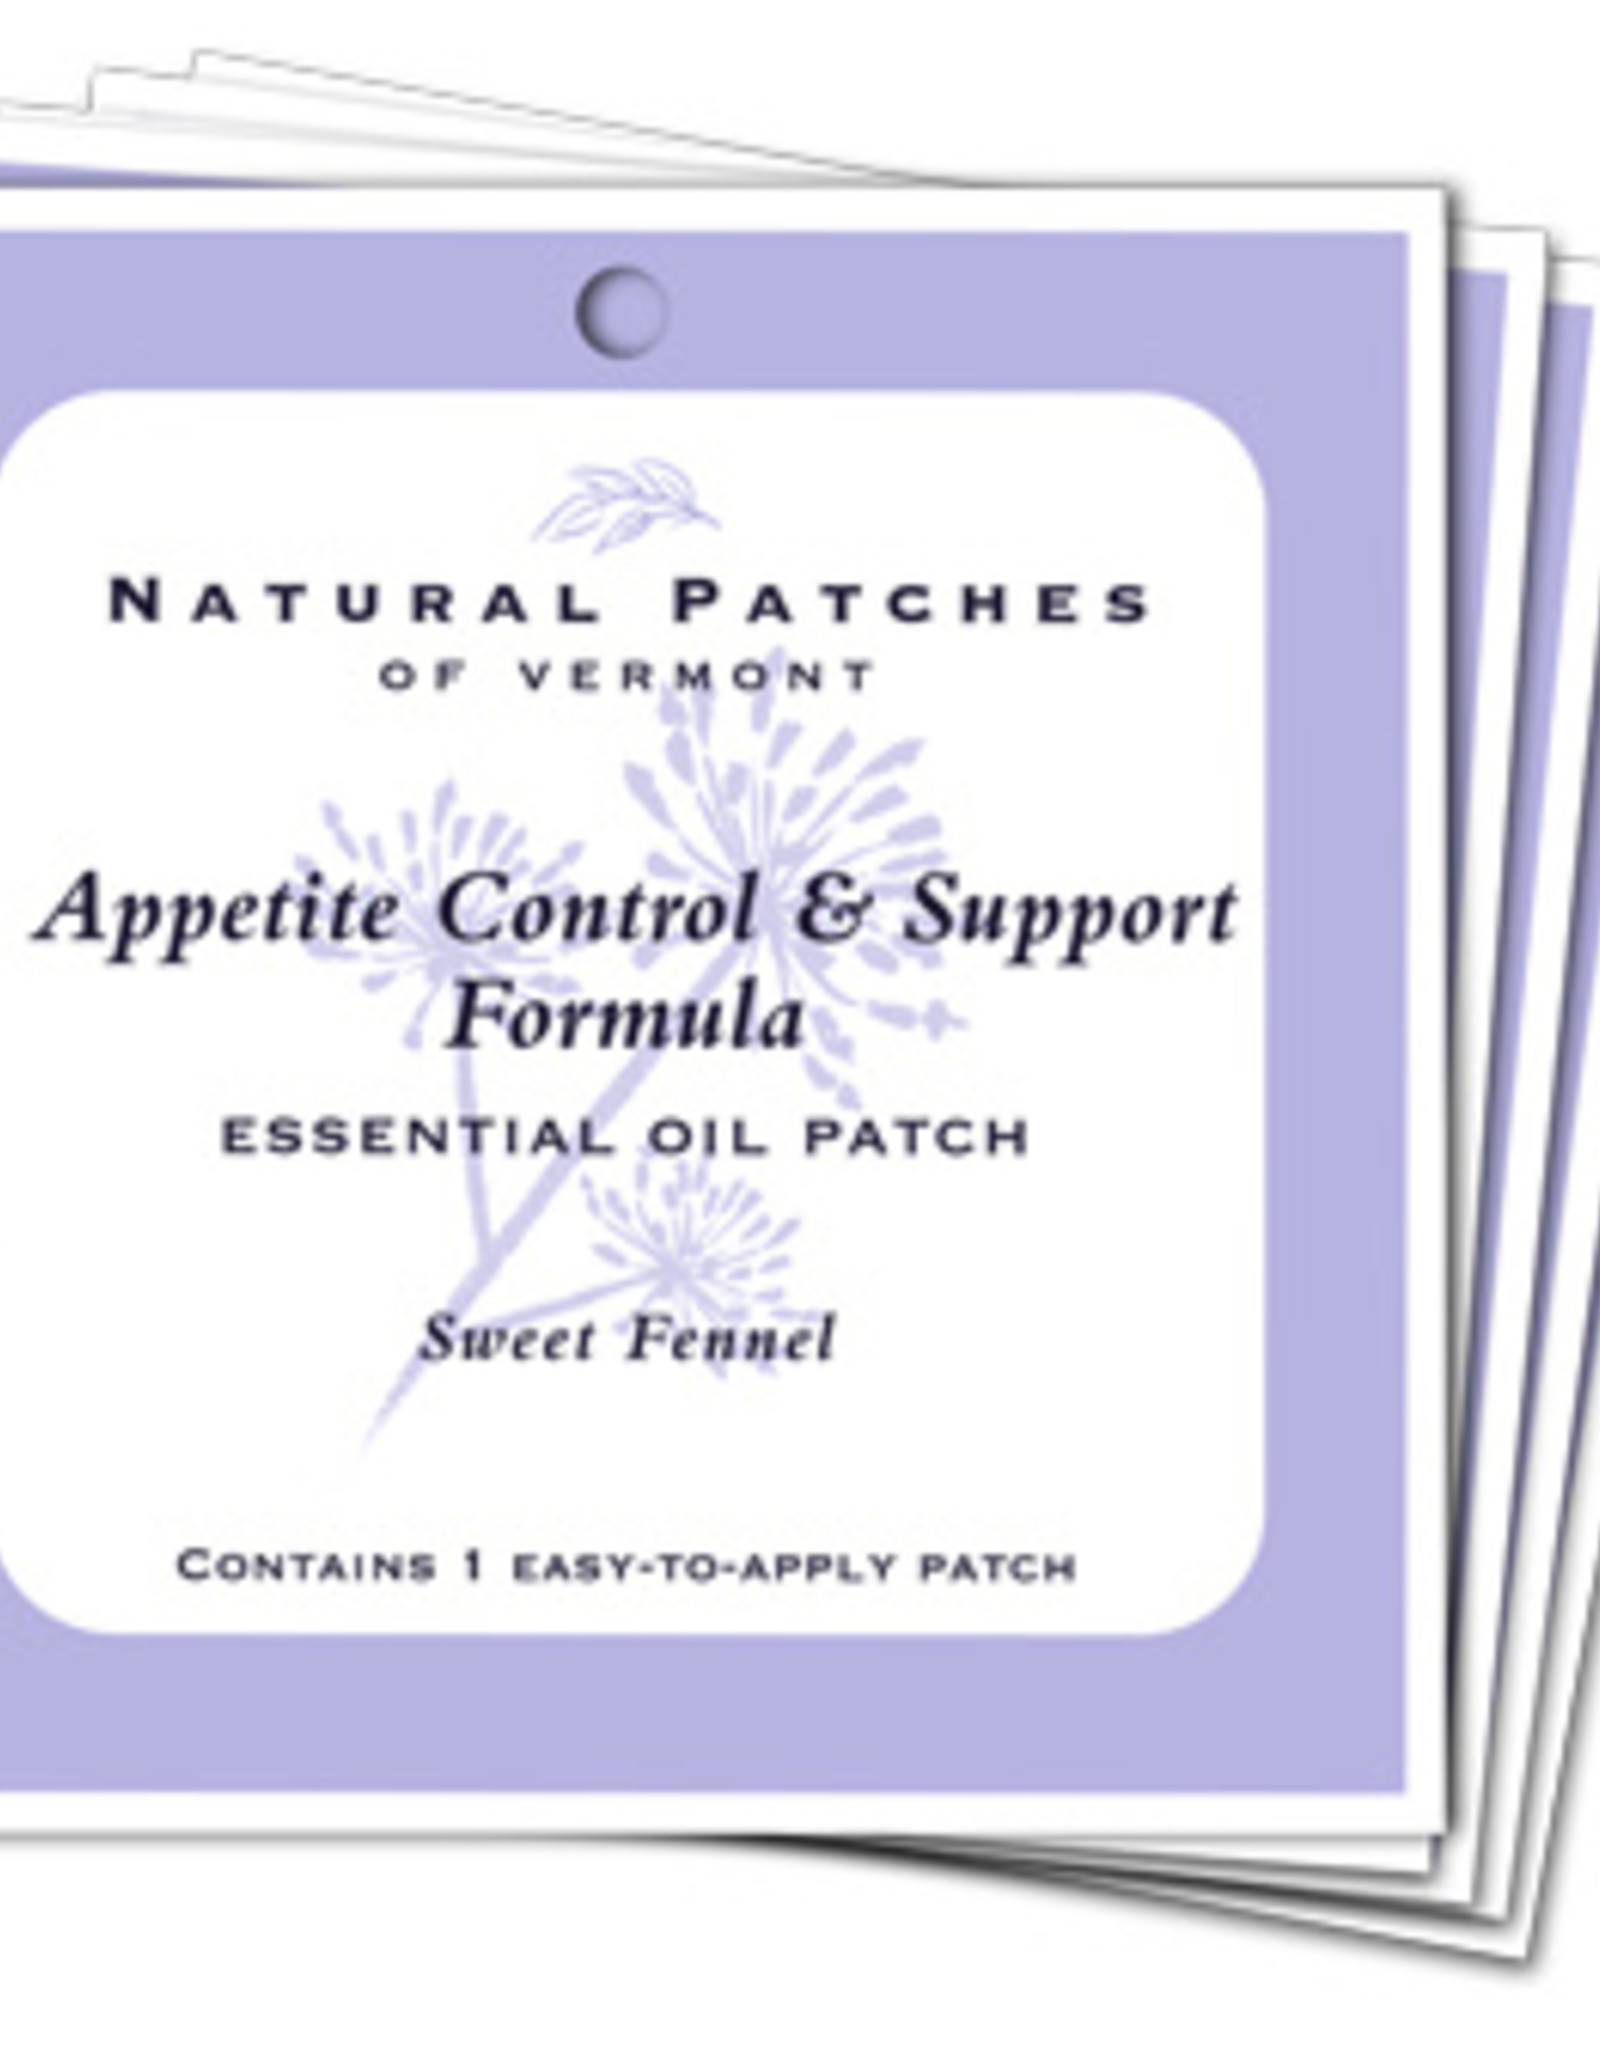 Natural Patches of Vermont Appetite Control & Support